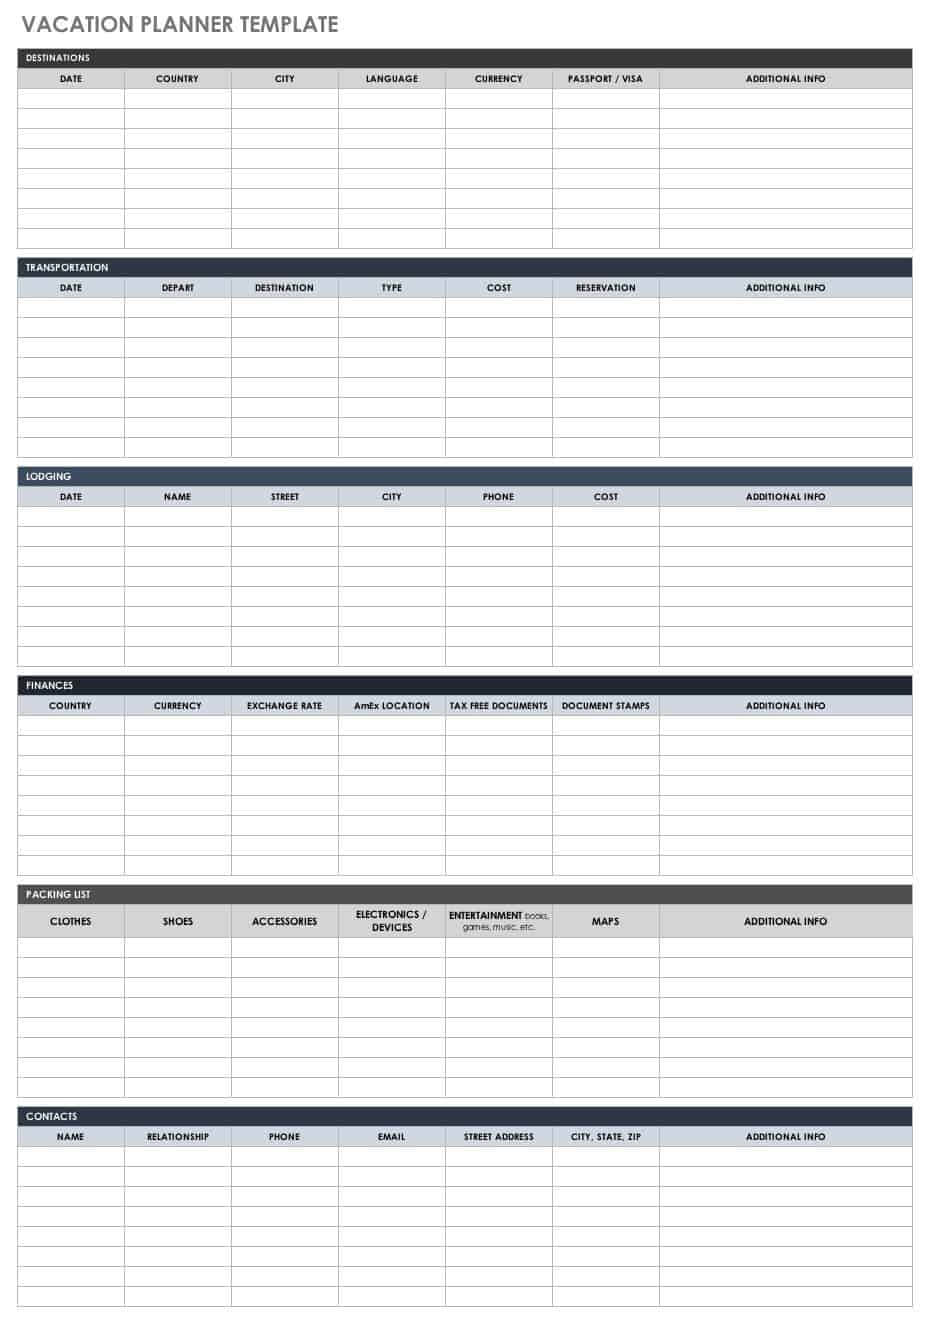 Free Itinerary Templates | Smartsheet Within Blank Trip Itinerary Template